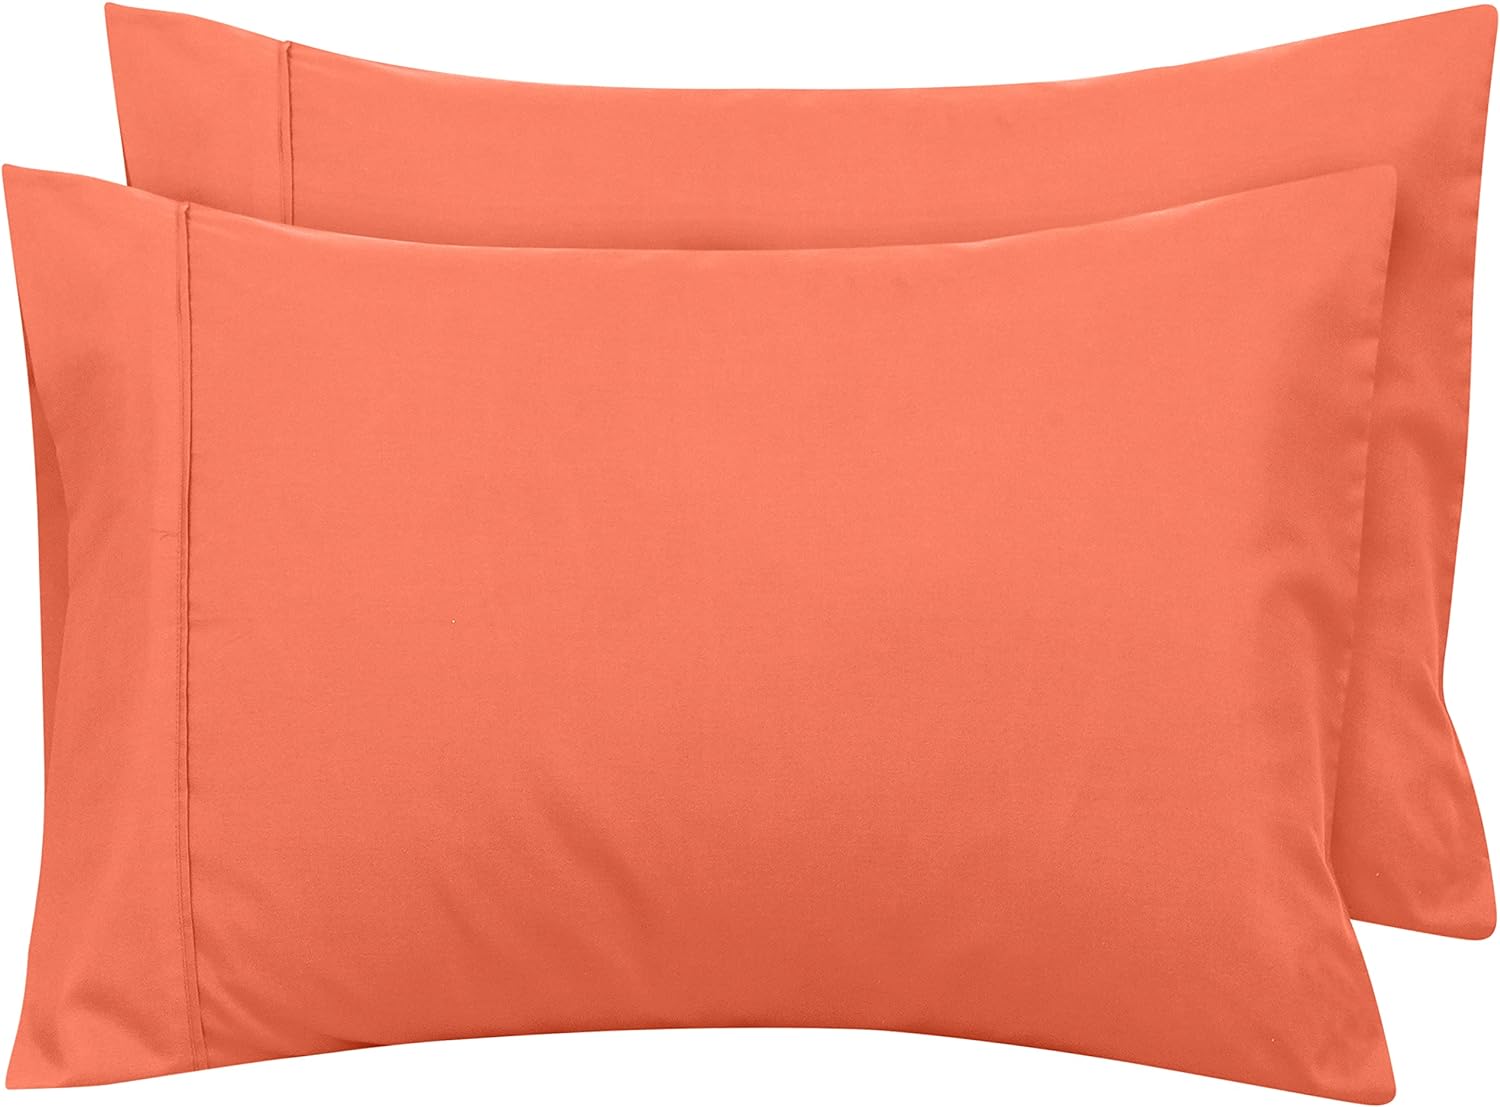 Royale Linens Standard Pillowcase Set of 2 - Bed Pillow Cover - 20"x26" - Coral Pillowcases - 1800 Brushed Microfiber, Wrinkle & Fade Resistant - Soft & Cozy- Standard Size Pillow Case (STD, Coral)